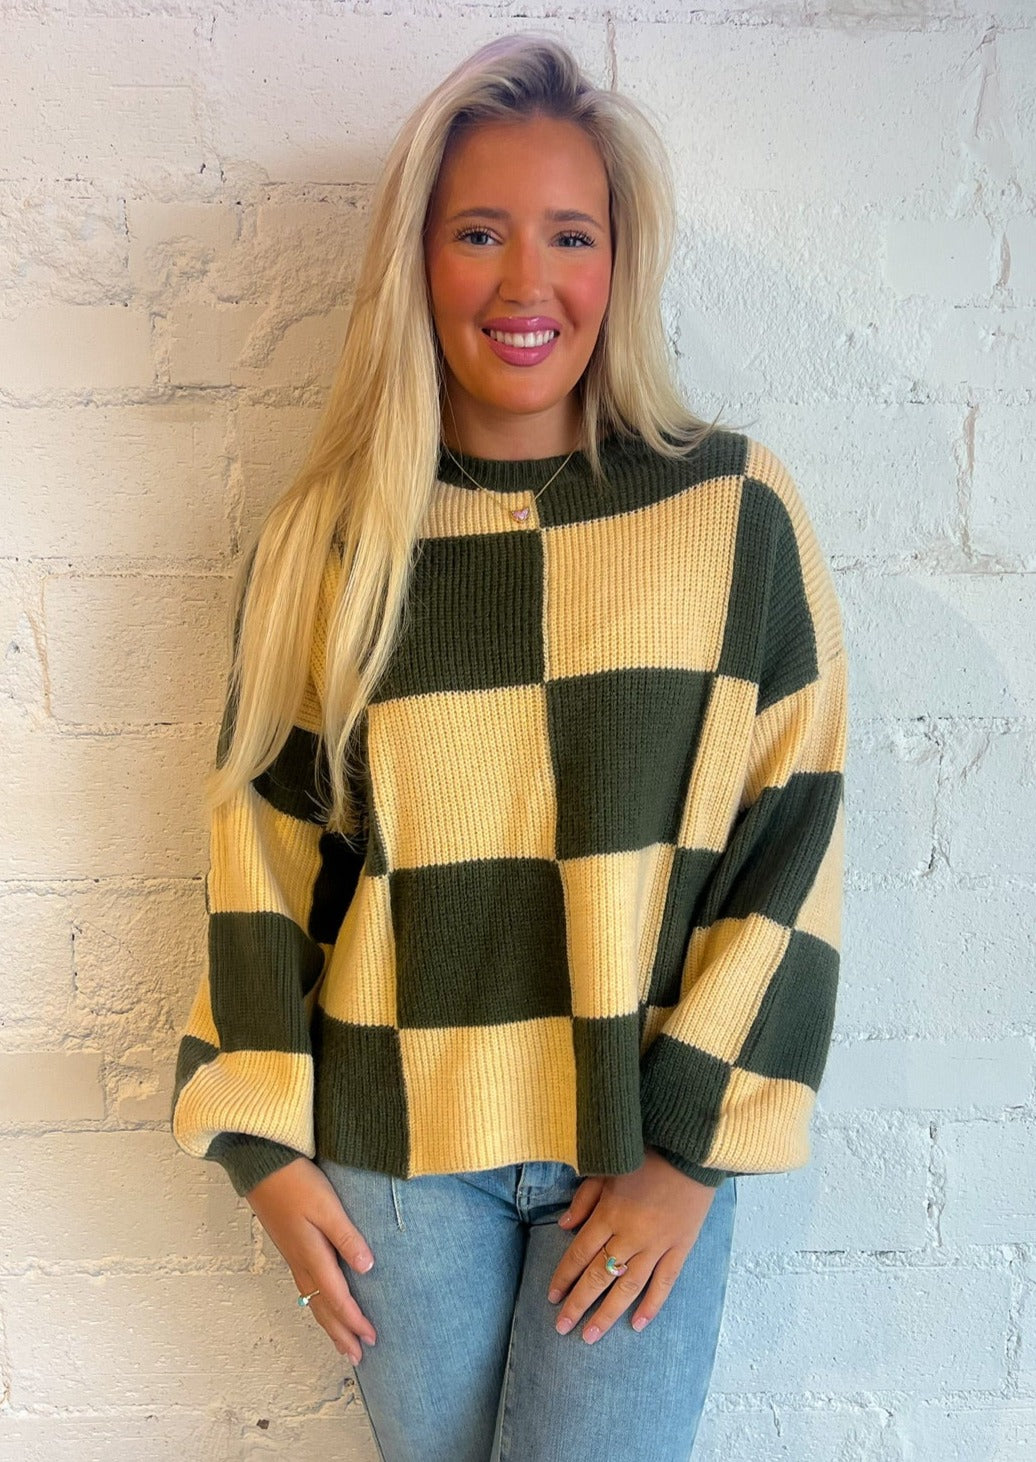 Apple Pie Sweater, Sweaters, Adeline, Adeline, dallas boutique, dallas texas, texas boutique, women's boutique dallas, adeline boutique, dallas boutique, trendy boutique, affordable boutique